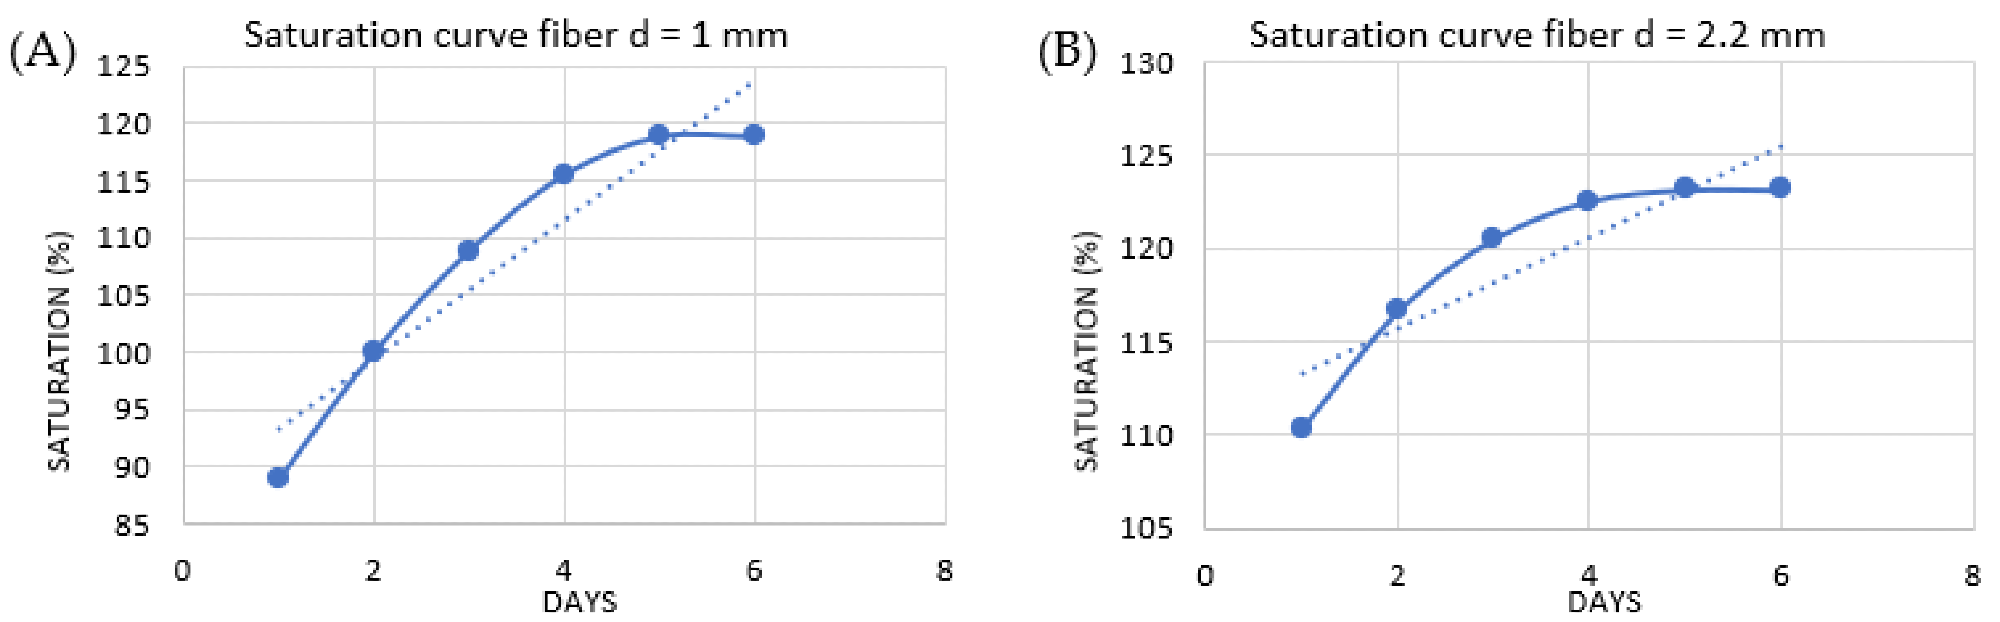 Saturation curves of hemp braids with diameter of 1 mm (A) and 2.2 mm (B).